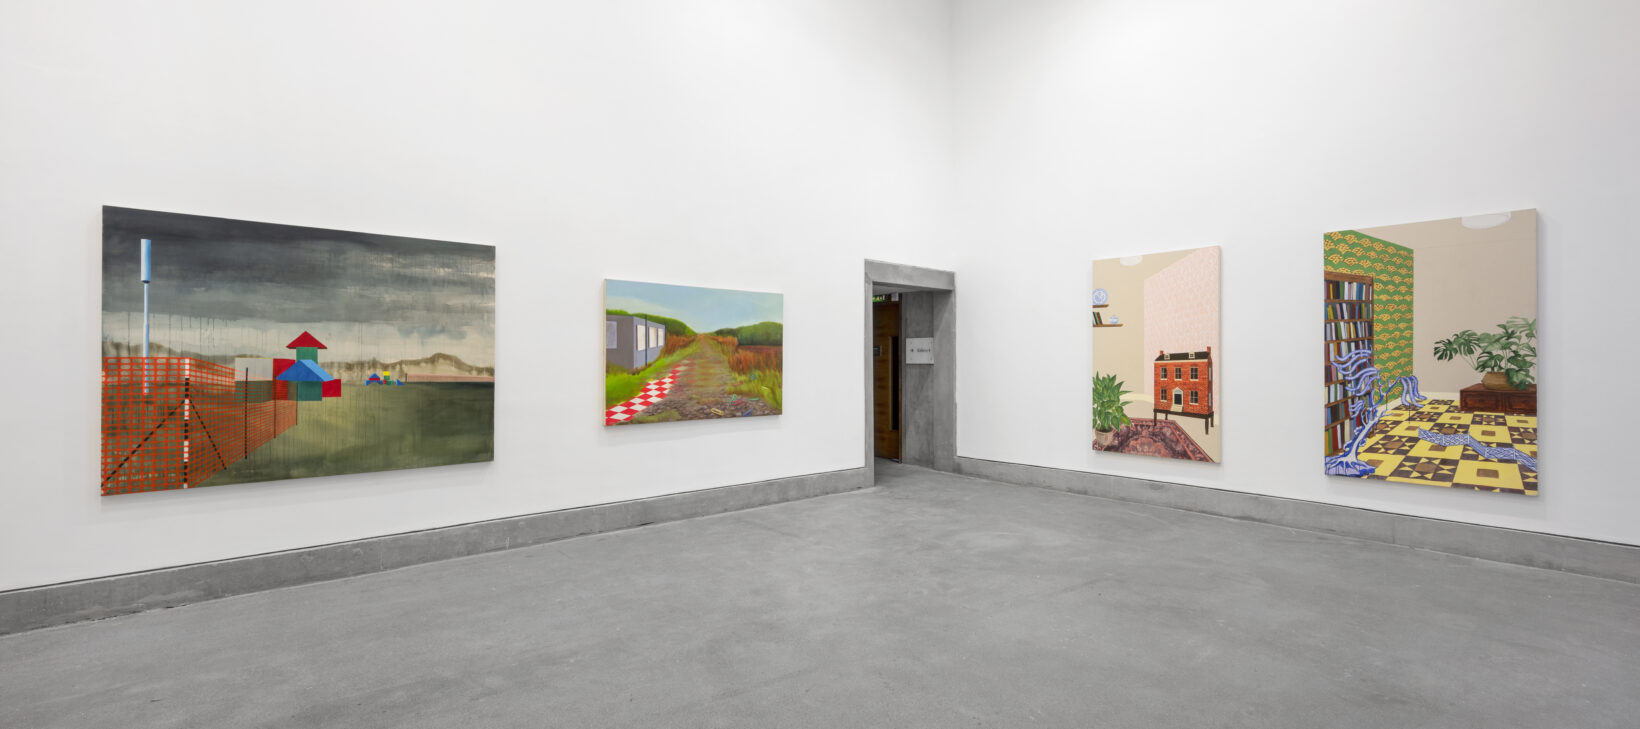 A photograph of the inside of Josie Jenkins' exhibition, Assembled Worlds. The photo shows two landscape paintings and two interior scenes.